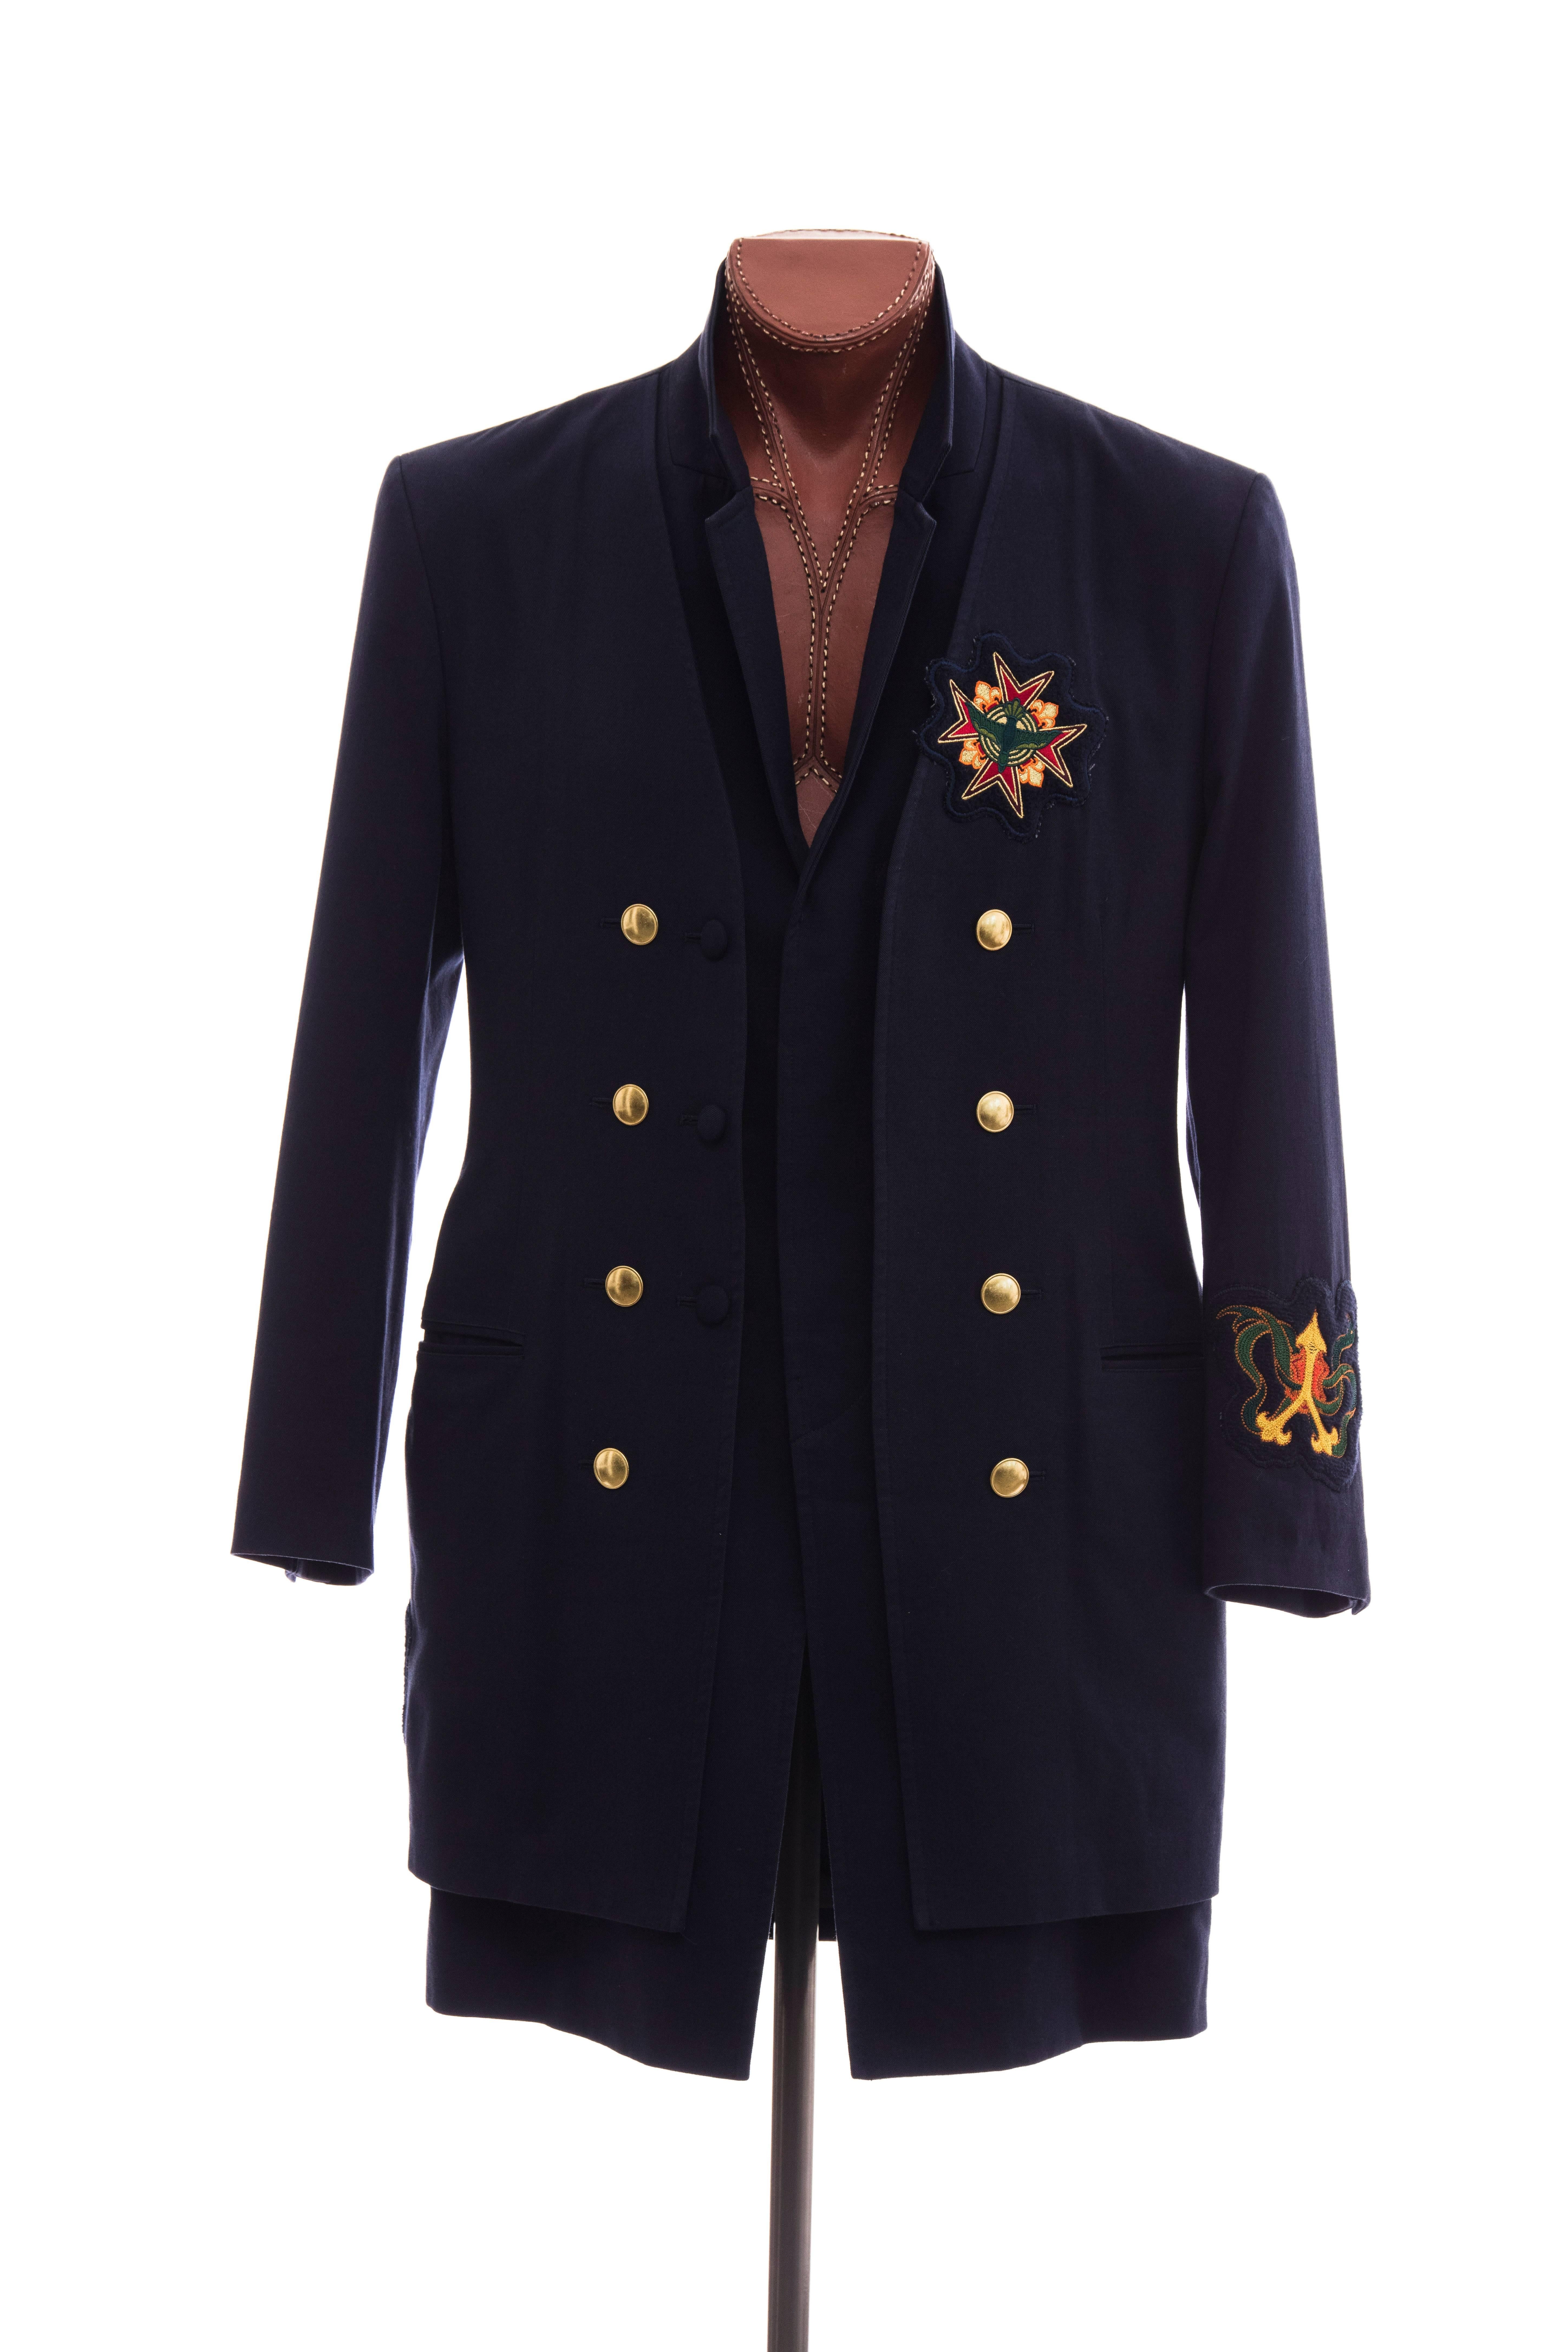 Yohji Yamamoto, Faoo 2012 navy double-breasted military coat with patches at chest, back and left sleeve cuff, two pockets and button closures at front. 

Japan Size 3

Chest 40